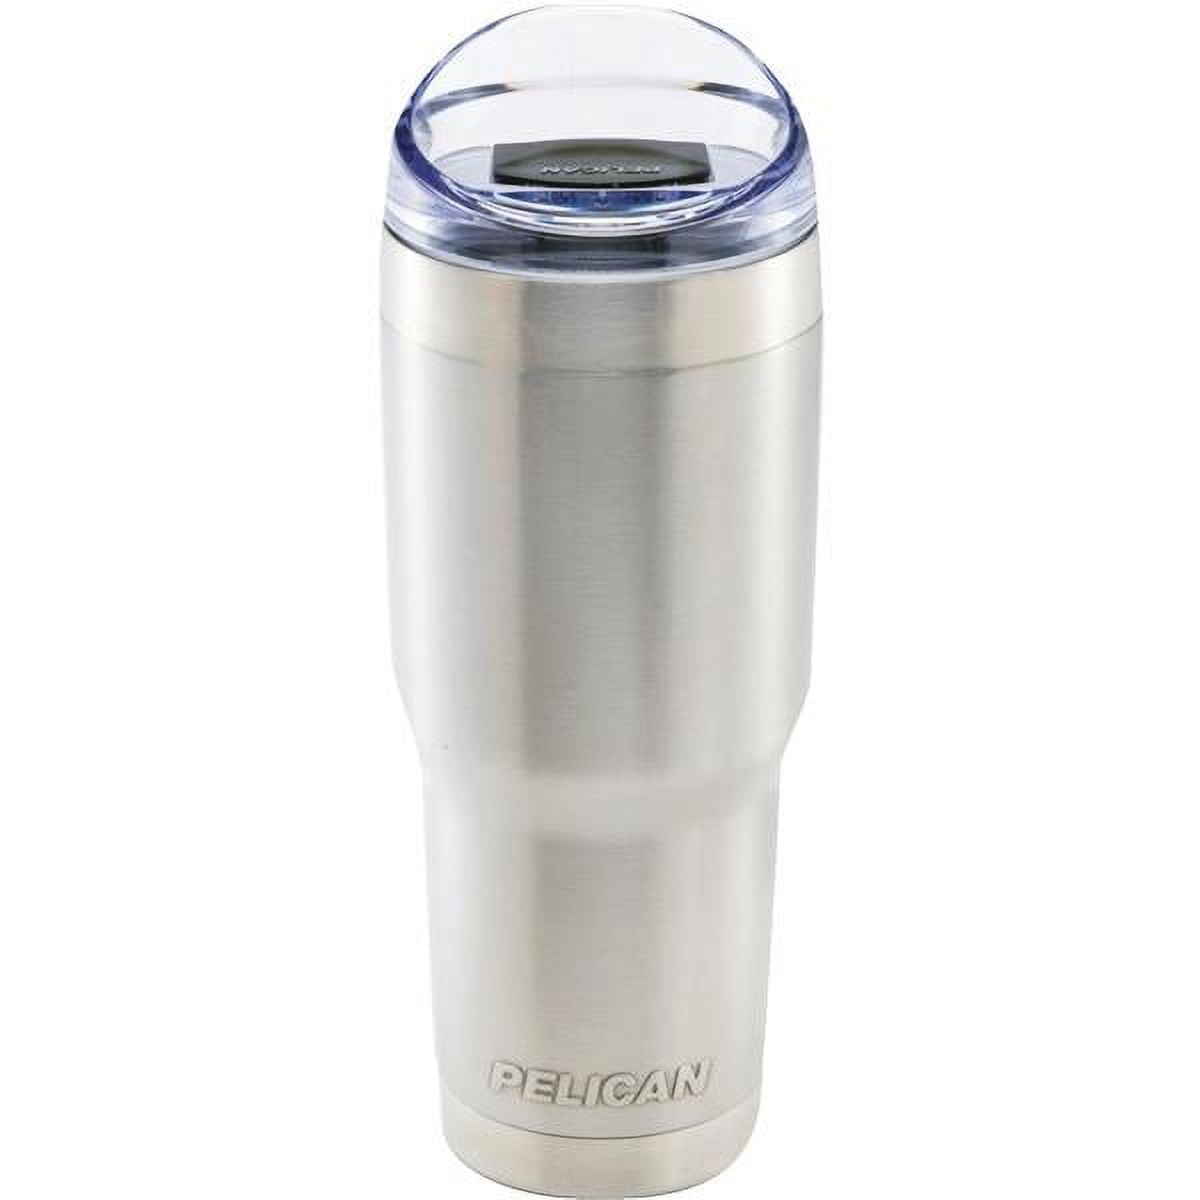 Pelican Stainless Steel Insulated Travel Mug Tumpler w/ Side Closure 32 OZ  Silver 